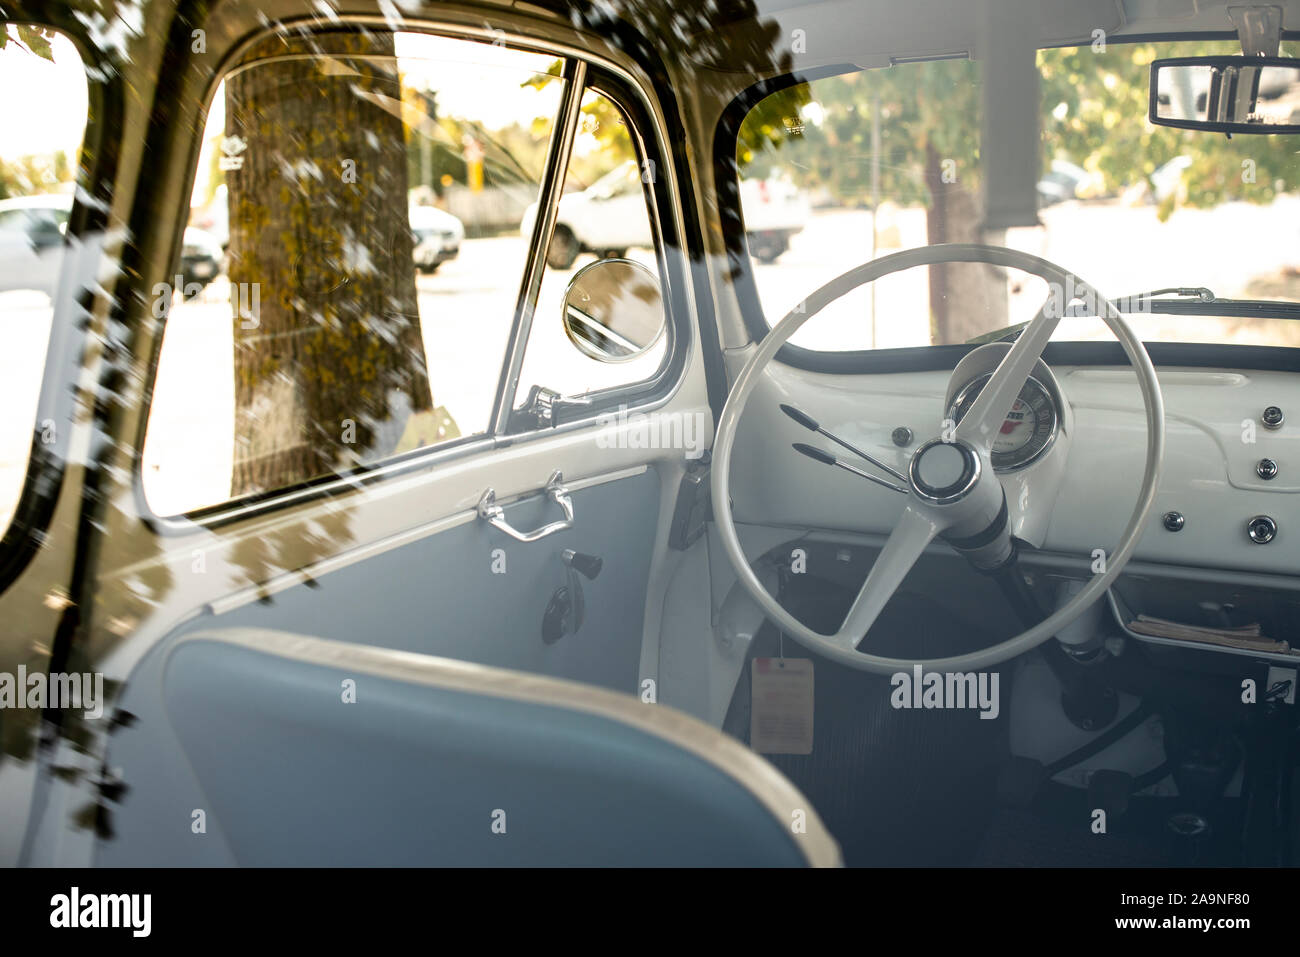 Interior of small white vintage car on the street. No people. White steering wheel. View through the window. Travel concept with car. Stock Photo